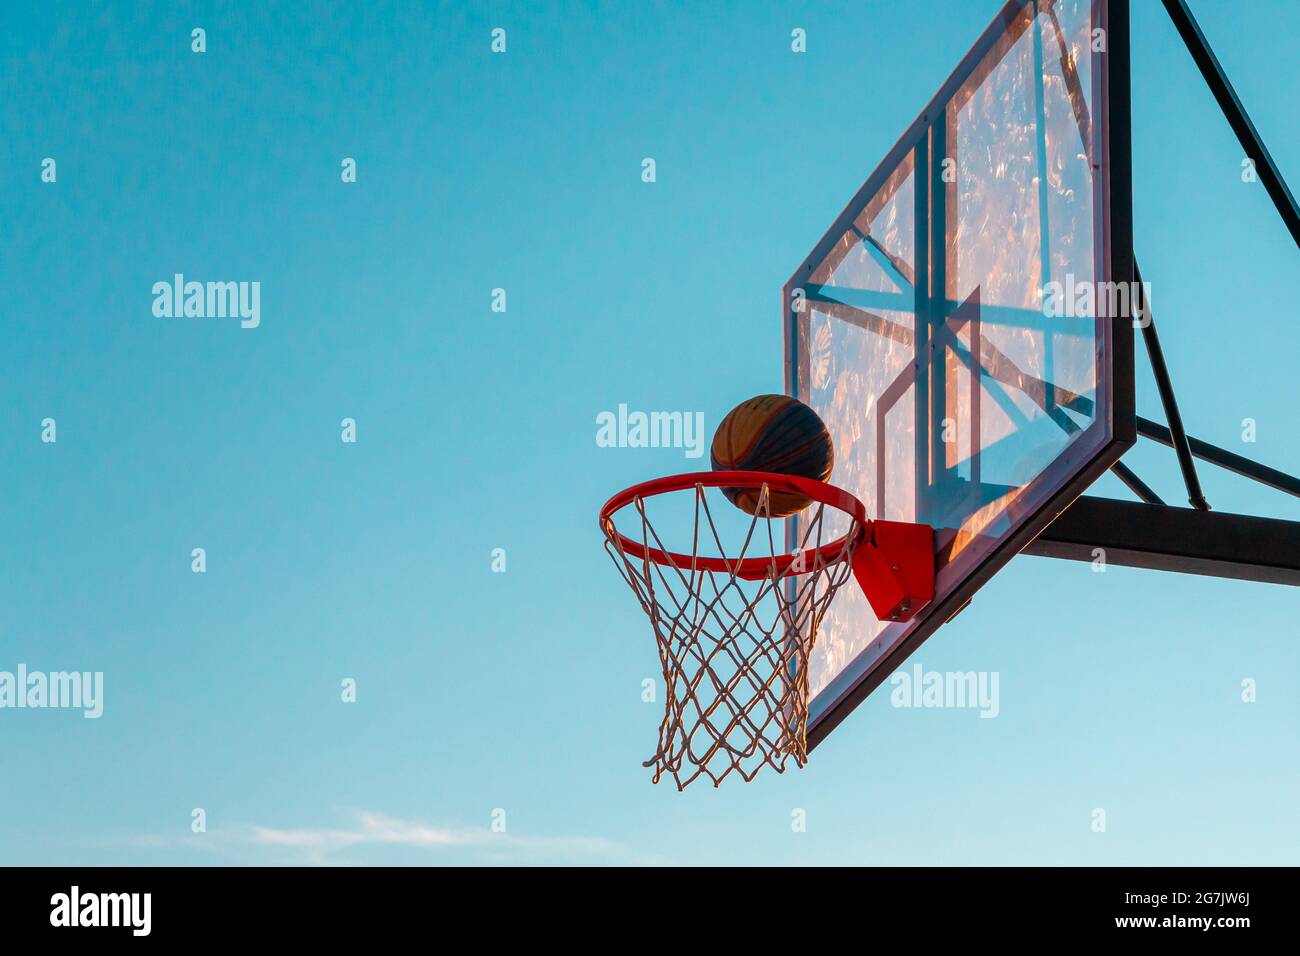 A basketball basket with a ball on a blue sky background. Transparent plastic basketball shield on the outdoor basketball court. Stock Photo